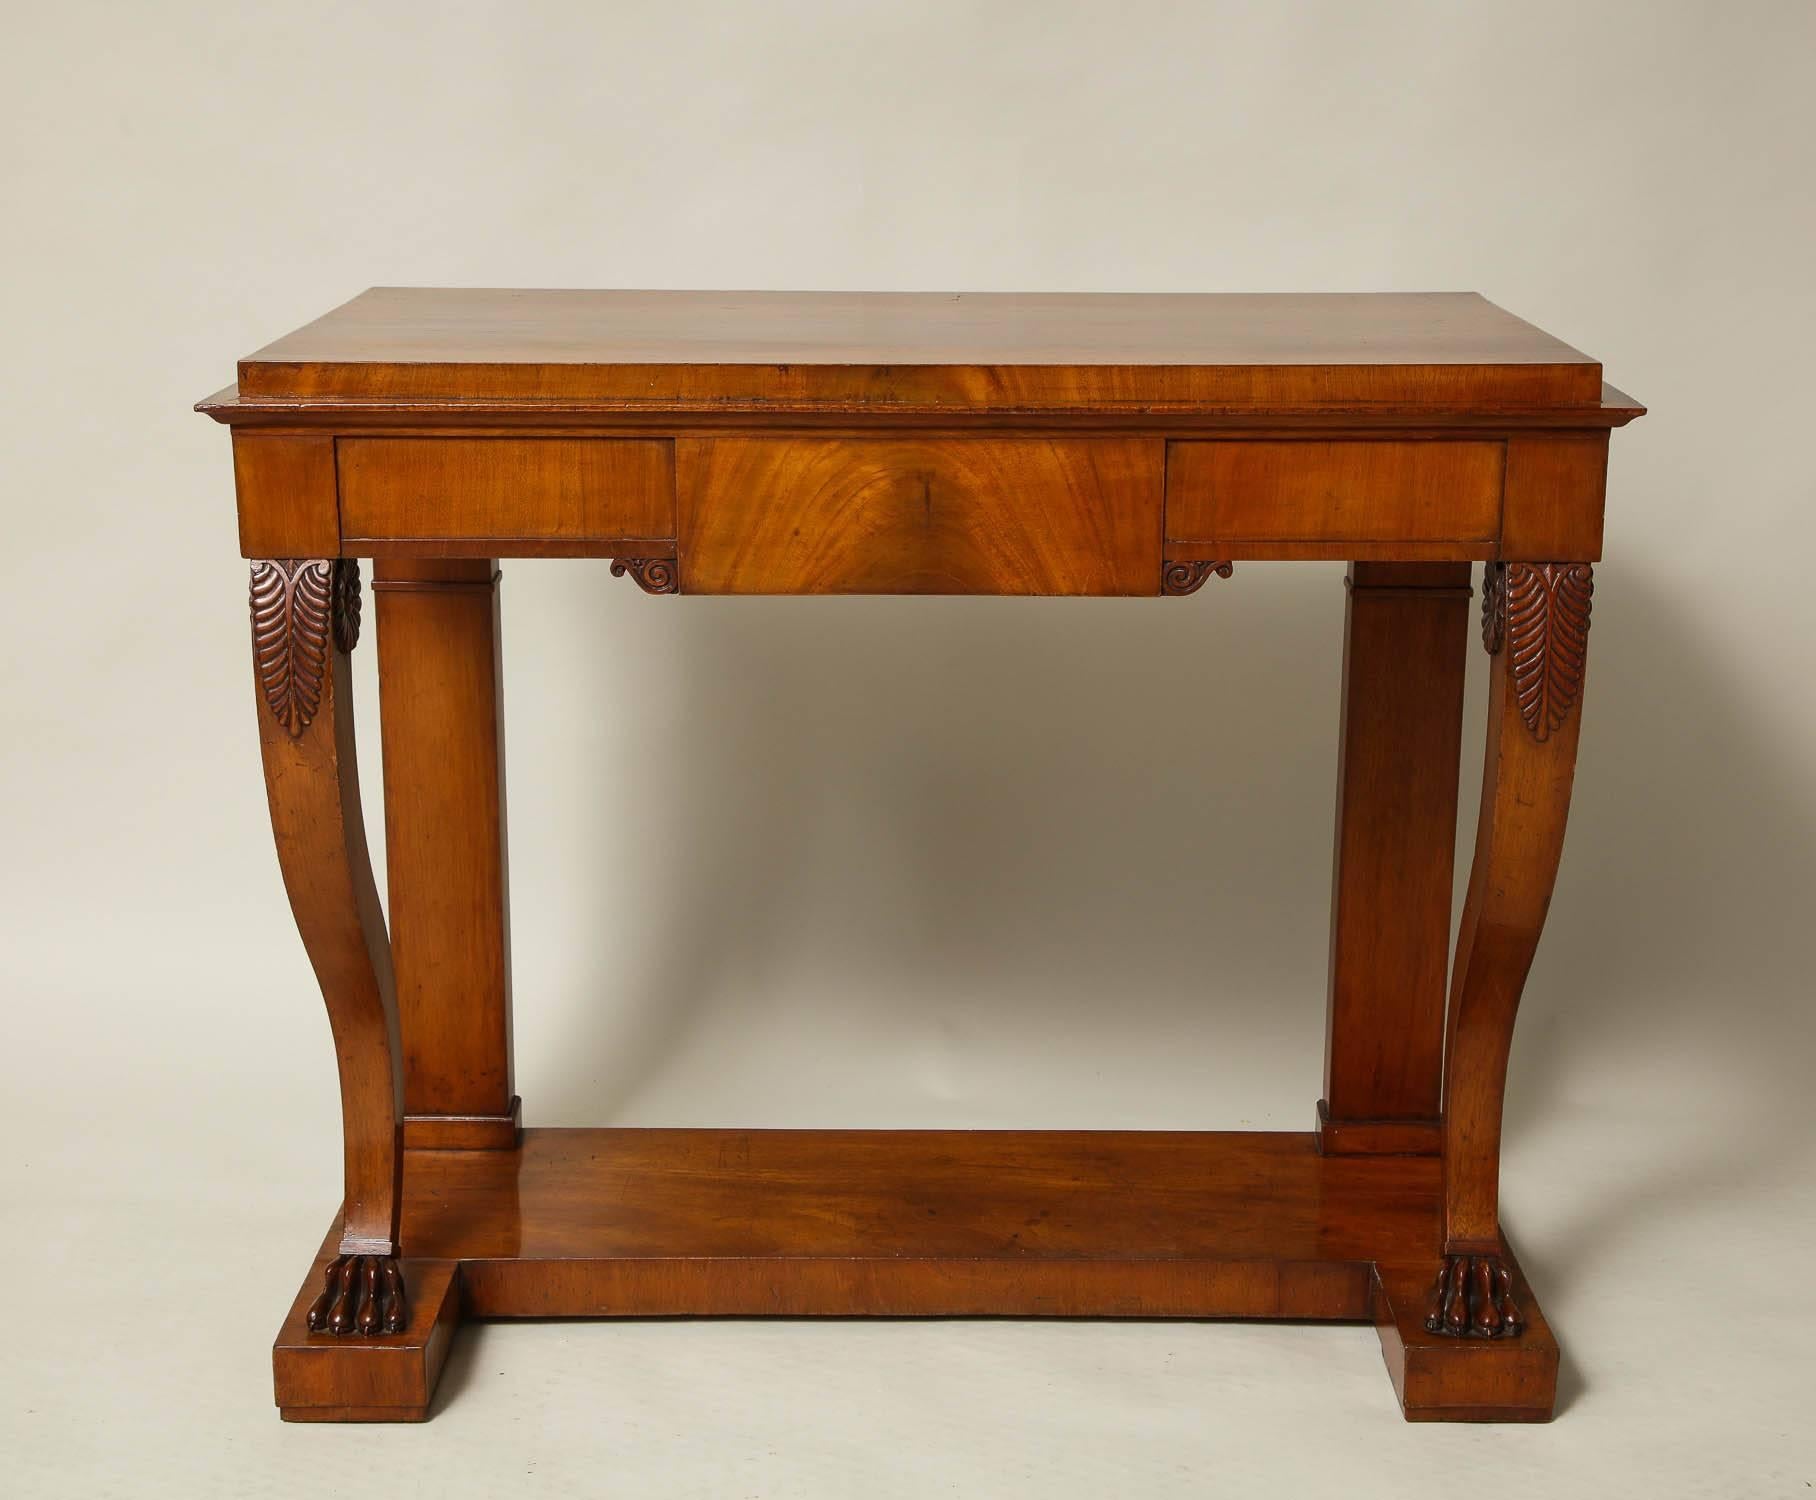 Very fine pair of Swedish early 19th century mahogany neoclassical pier tables by AJ Soderholm, Abo Sweden (each labeled to the underside) having square edged tops and very architectural aprons standing on patera decorated scrolled legs ending in